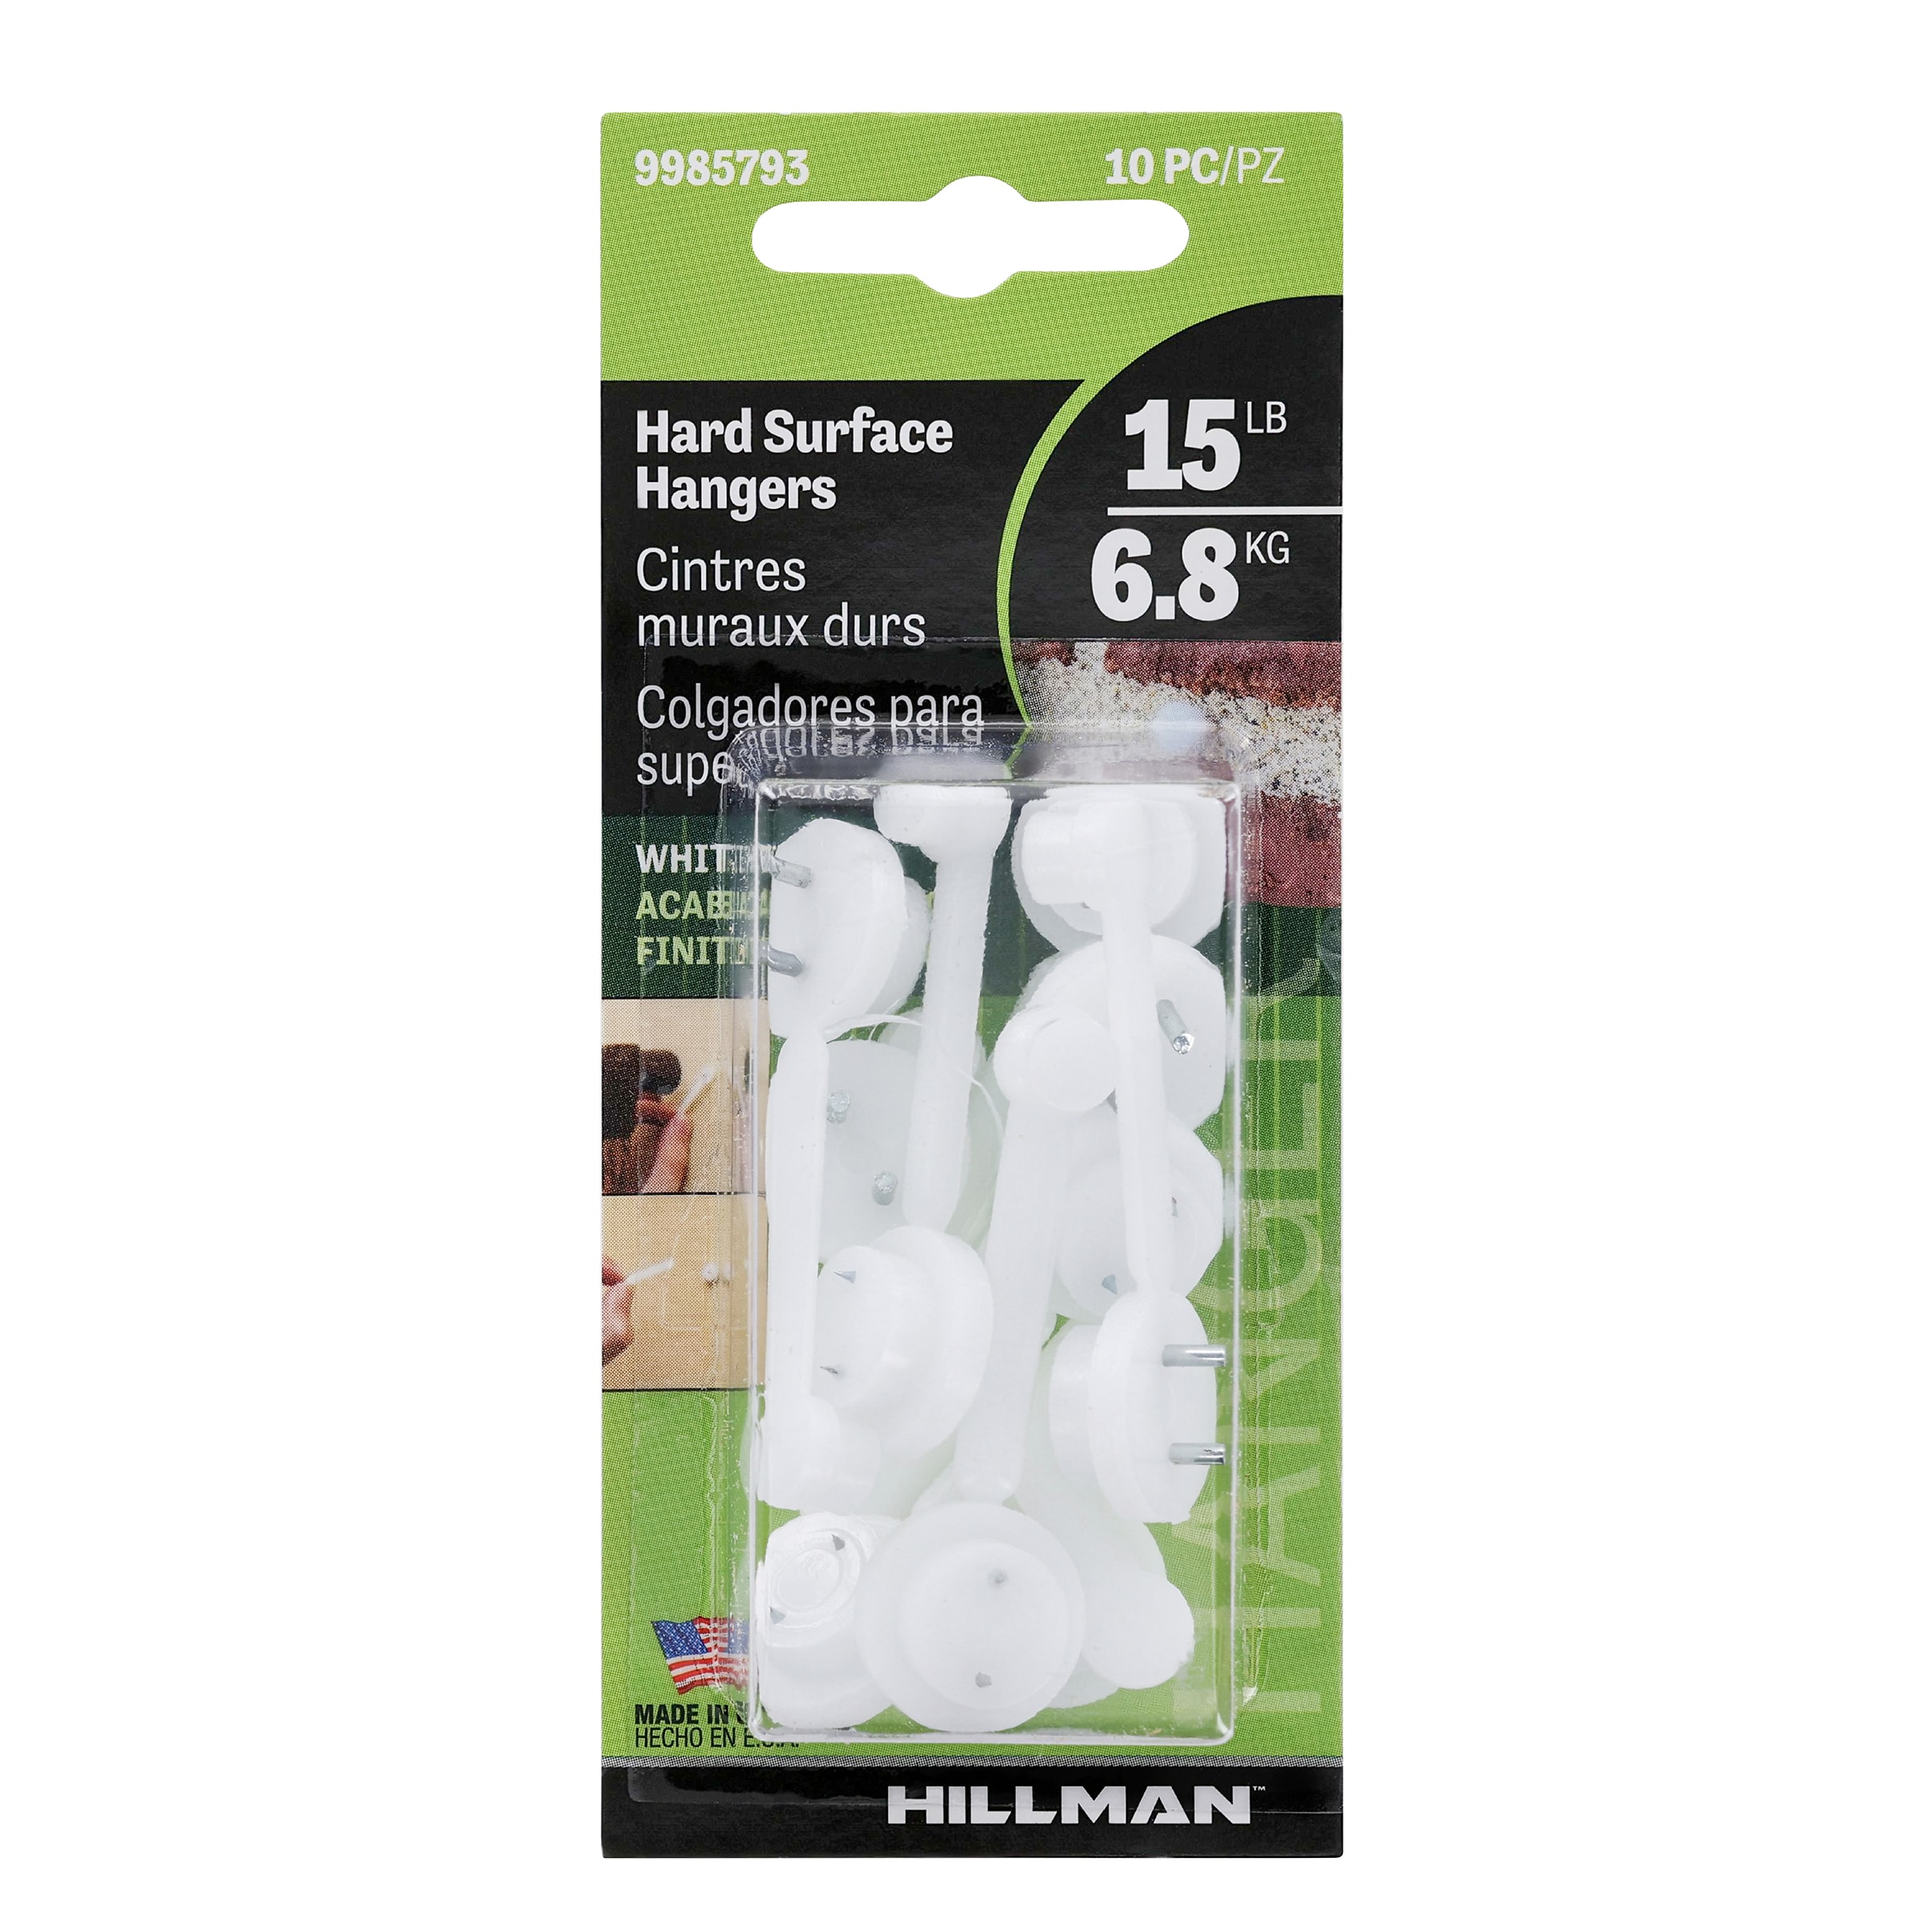 Hillman 0.5lb Vinyl Siding Hooks in the Picture Hangers department at